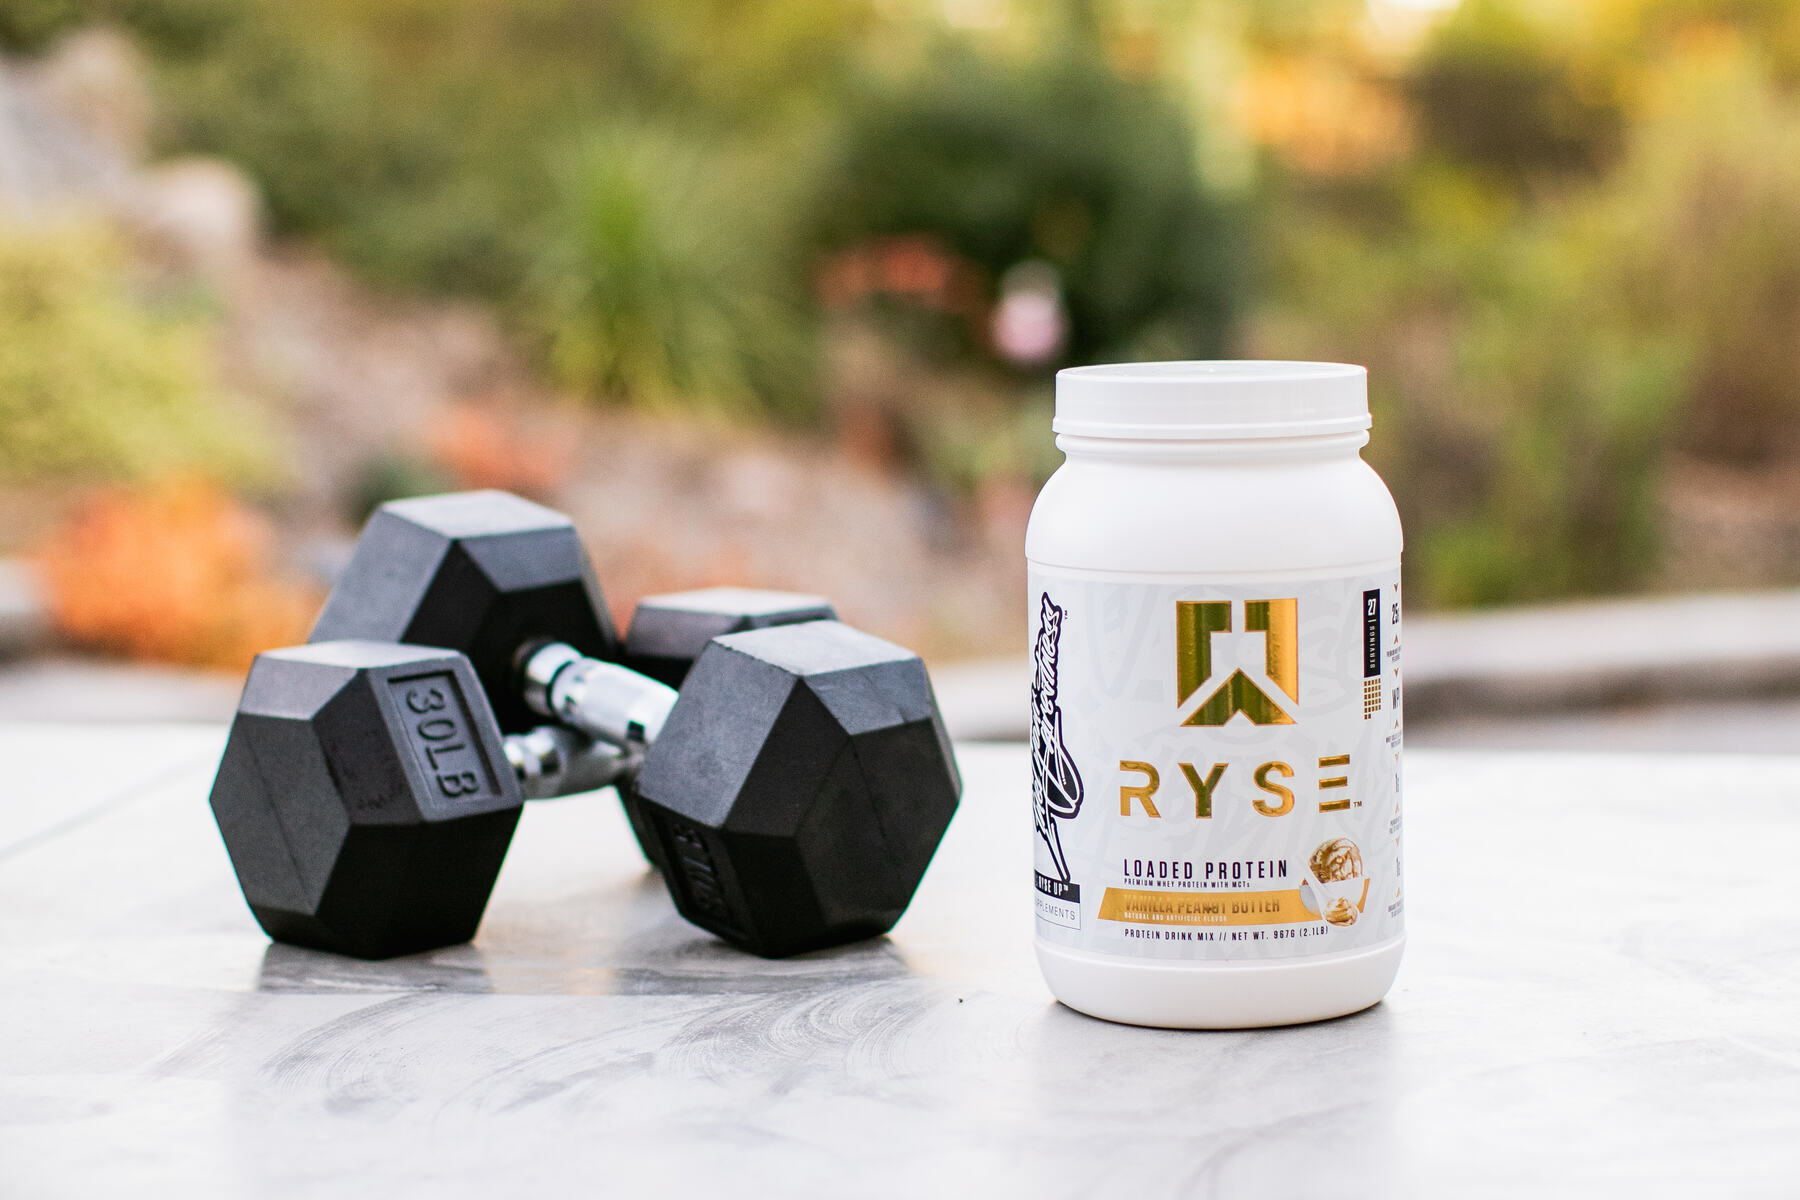 An outdoor setting with a container of RYSE Loaded Protein on a surface next to a pair of black dumbbells with green foliage in the background